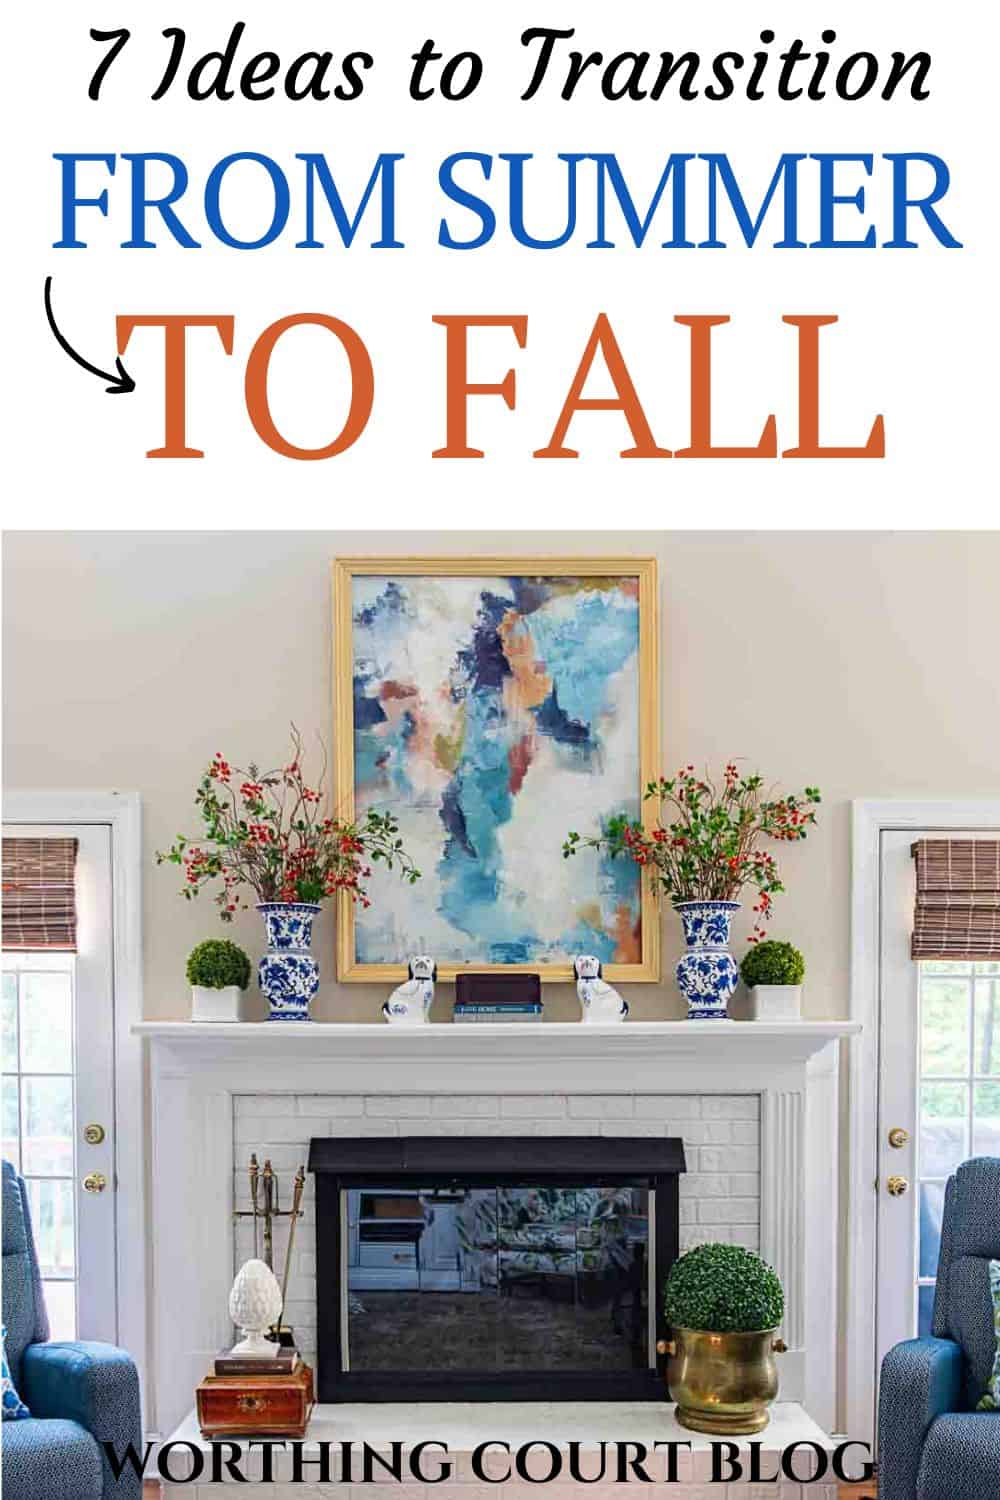 Pinterest graphic for 7 ideas to transition from summer to fall